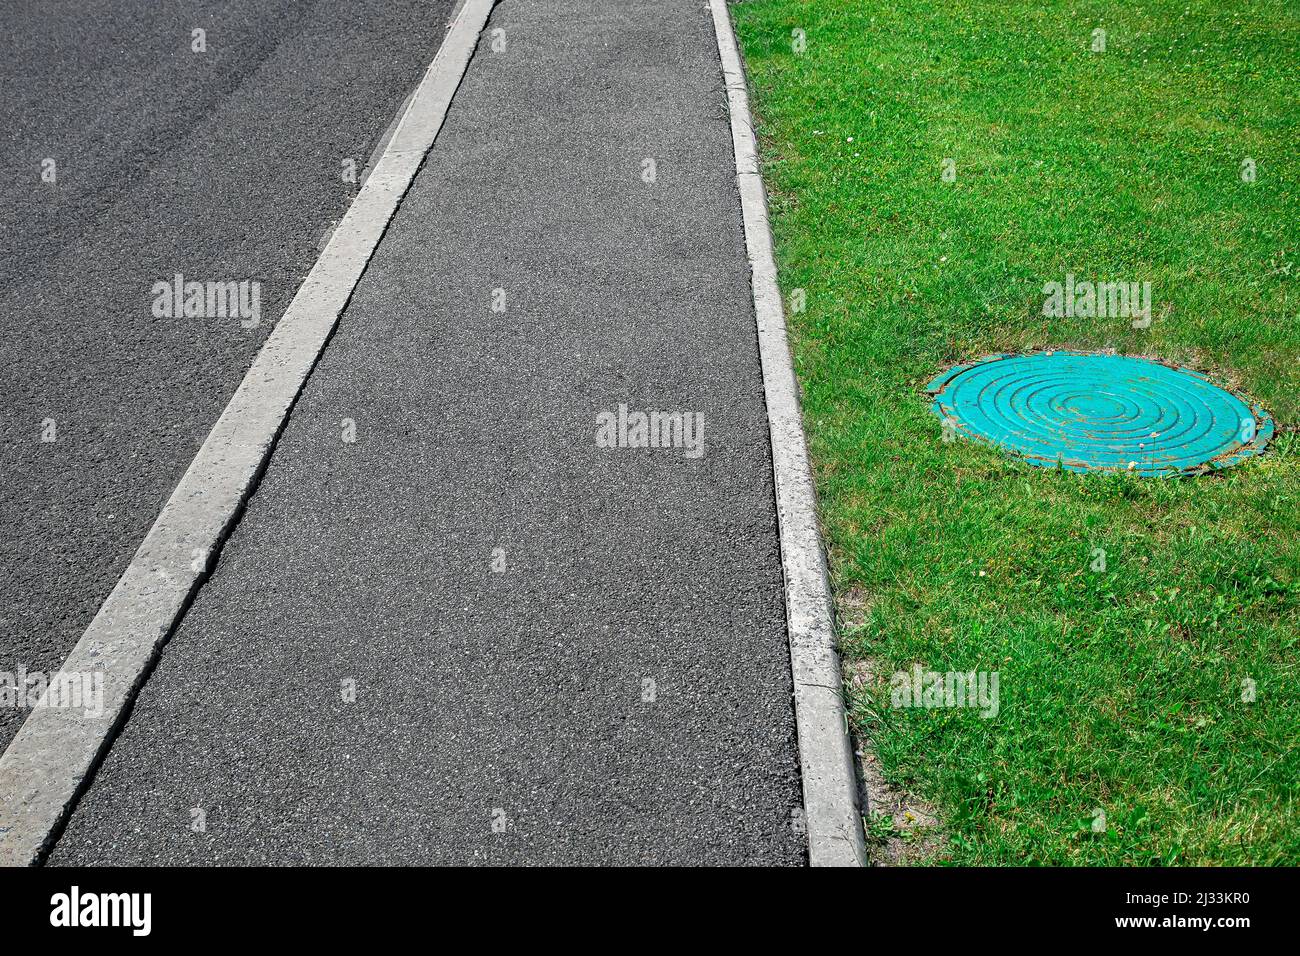 Asphalt road with tarmac footpath with stone curb and septic tank manhole on green lawn, nobody. Stock Photo